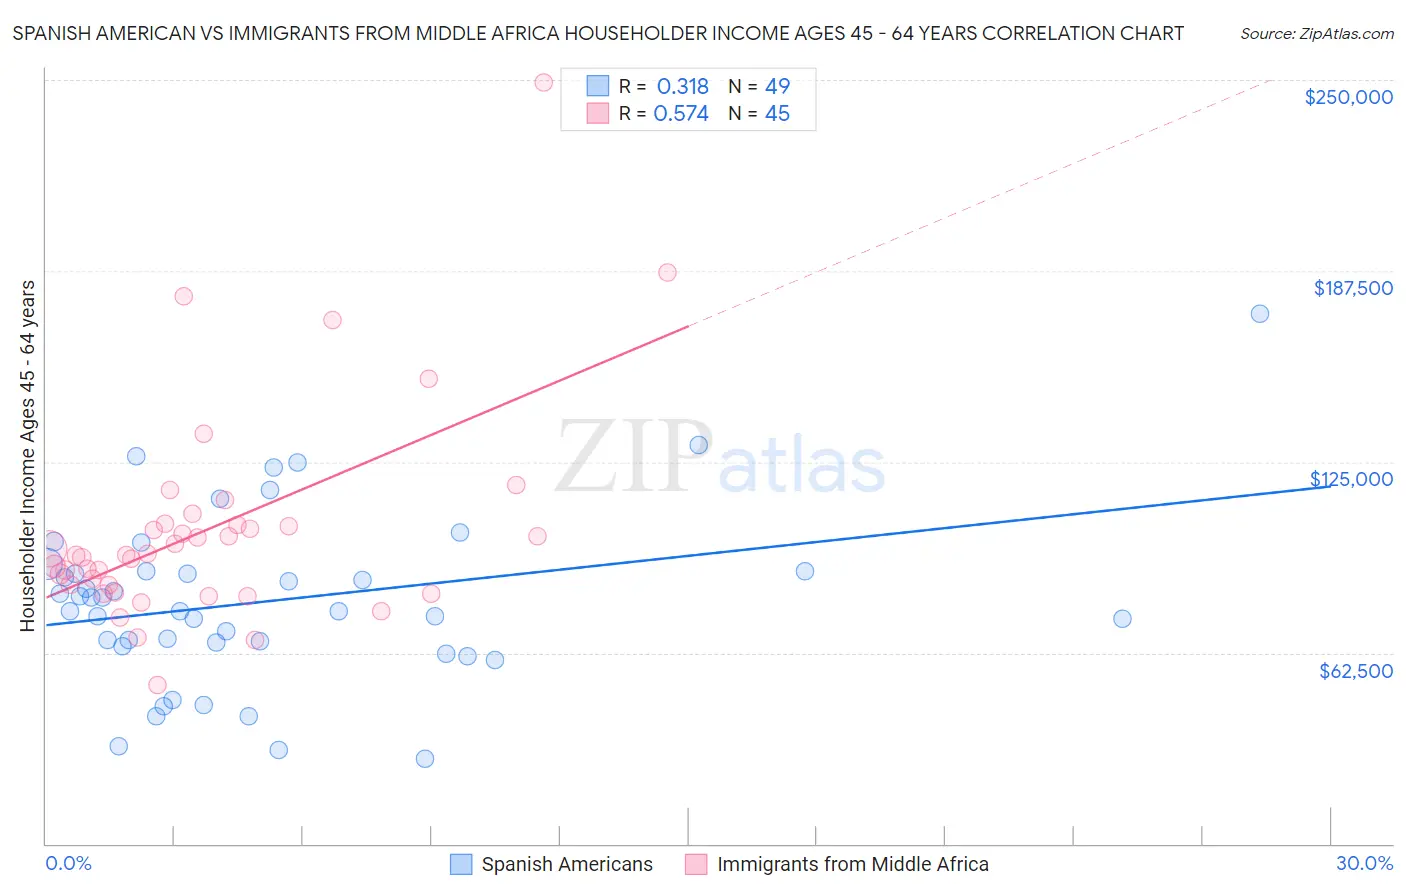 Spanish American vs Immigrants from Middle Africa Householder Income Ages 45 - 64 years